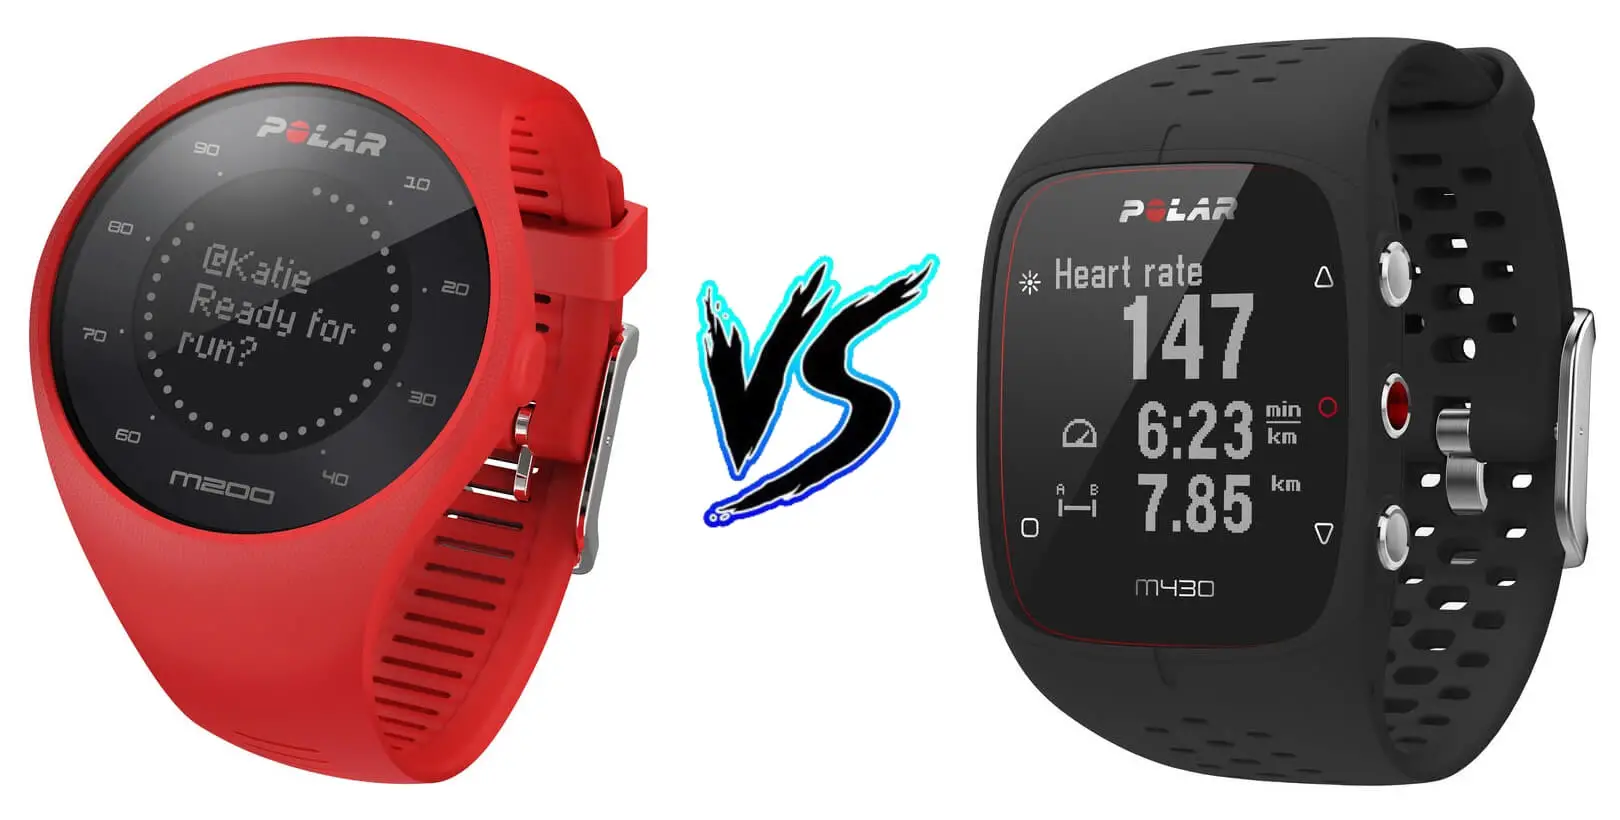 Polar M200 vs M430 – Which one is better?